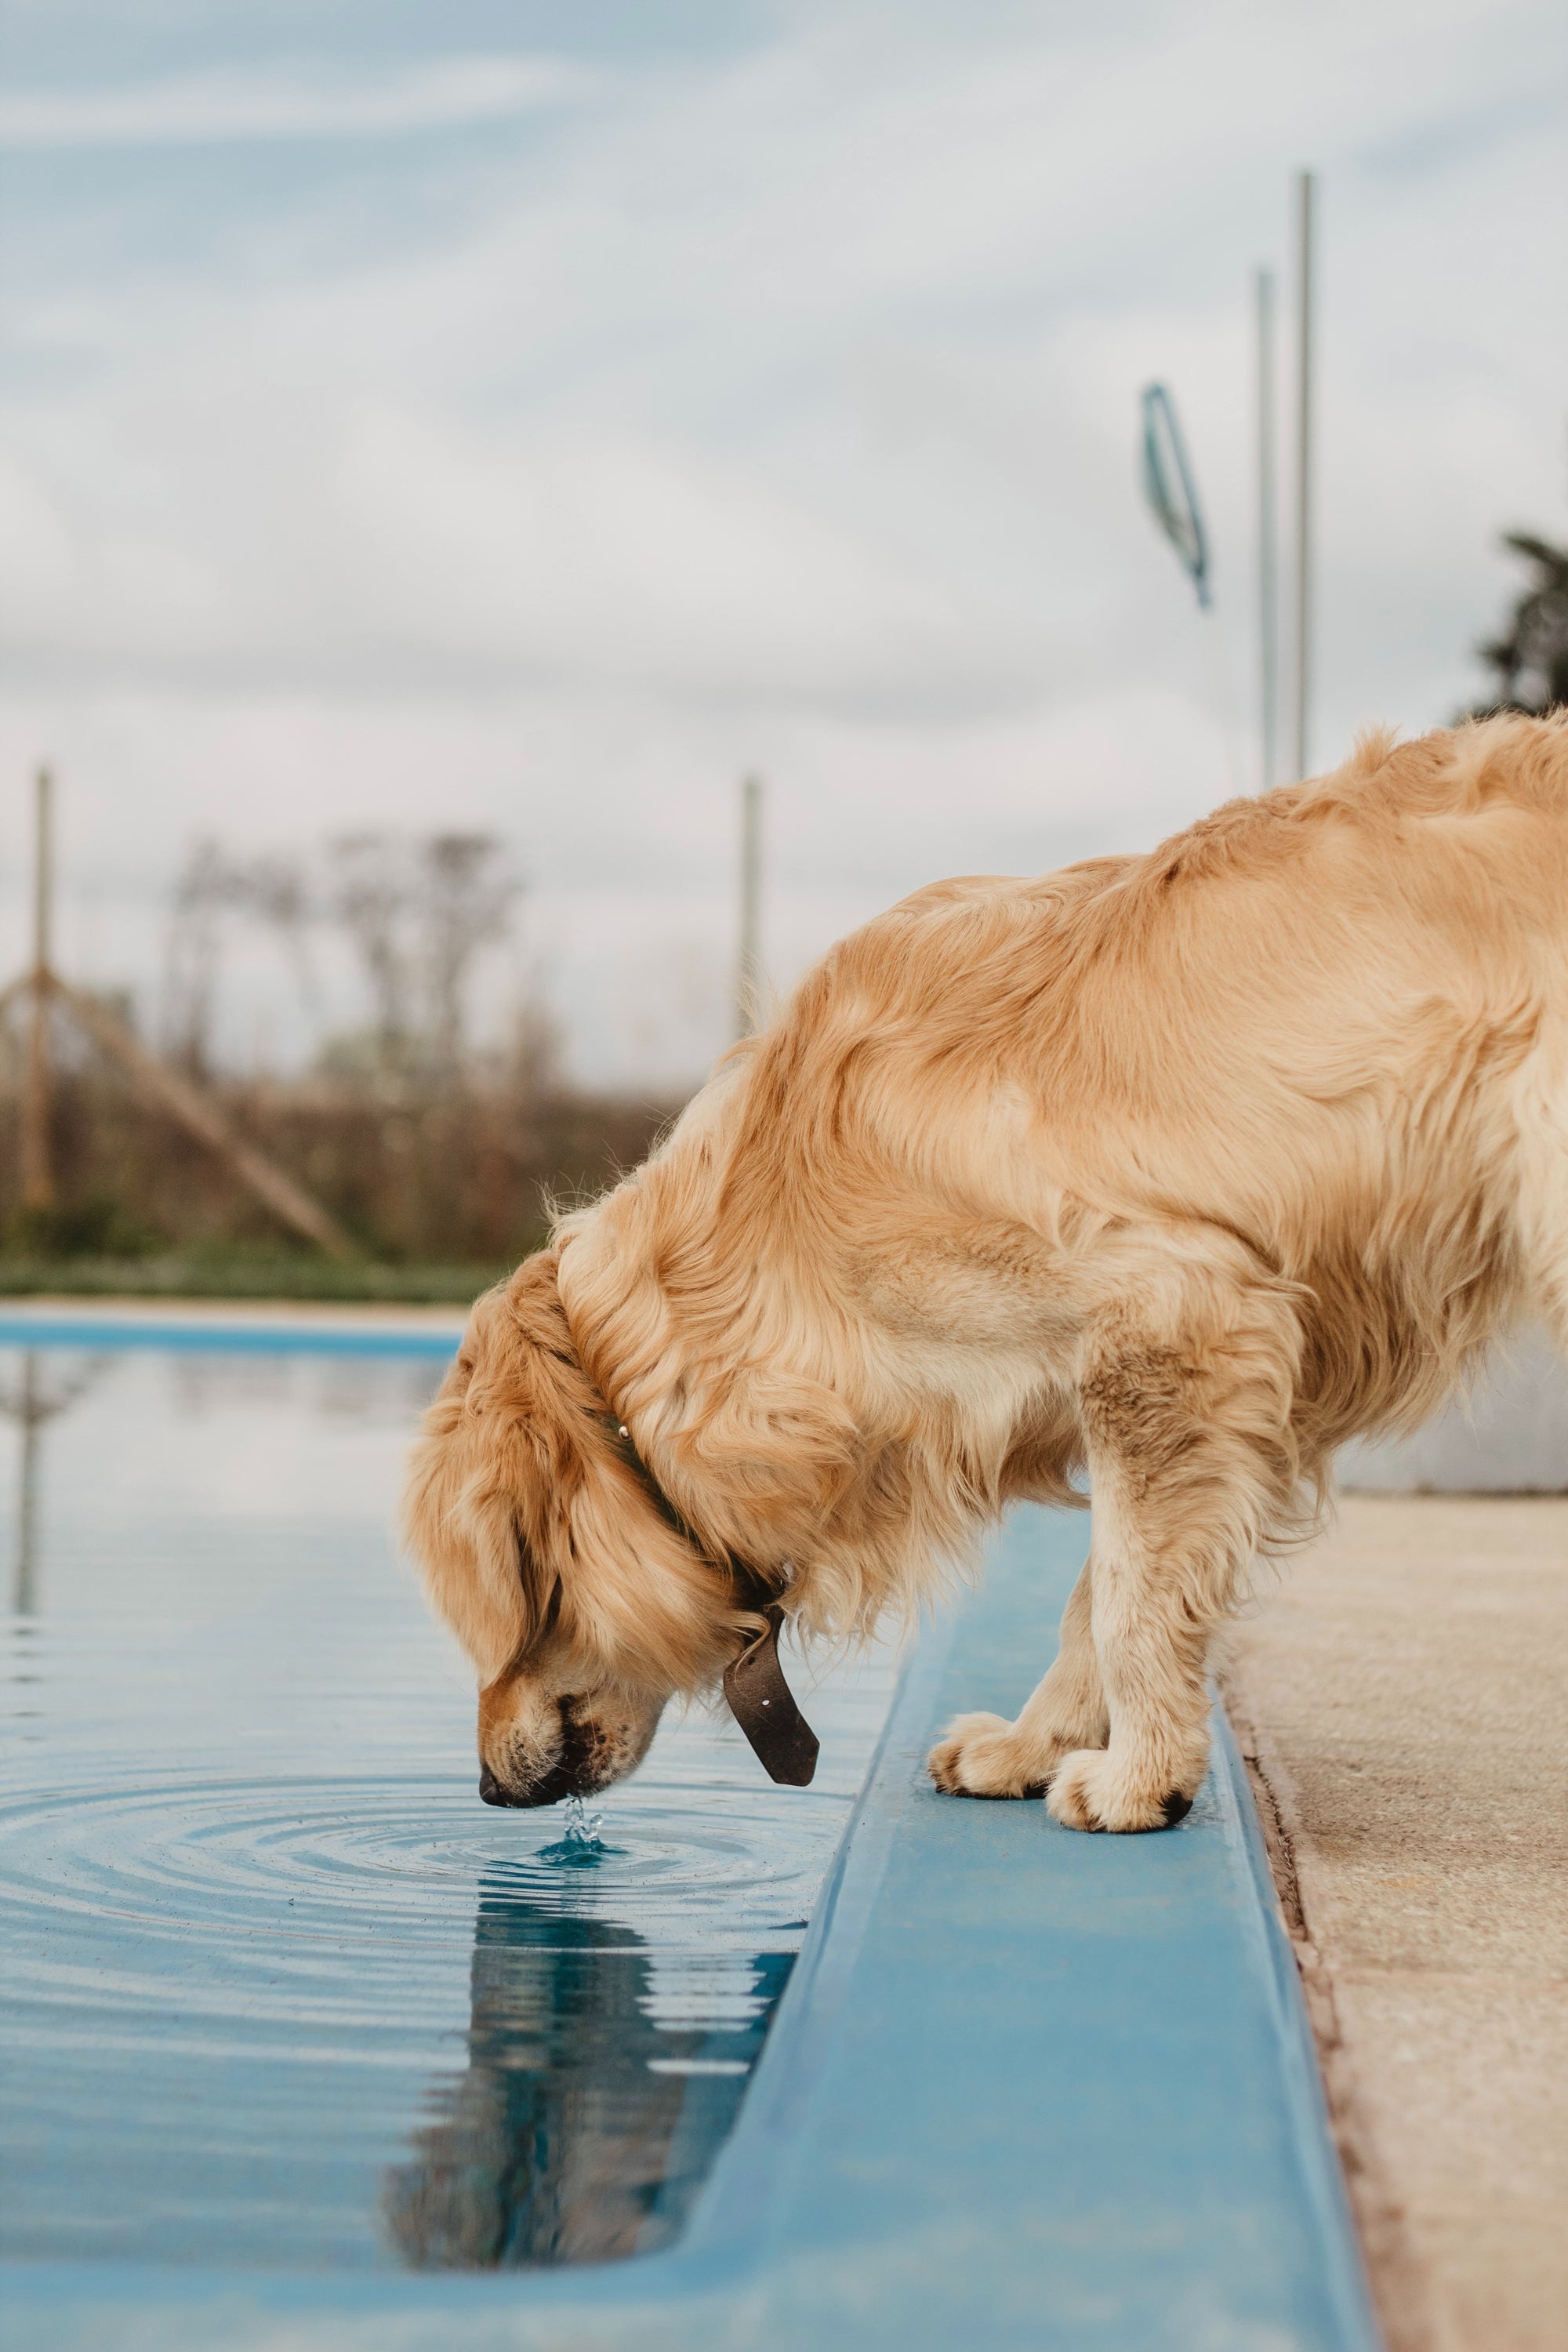 Dog leaning over a swimming pool to taste the water